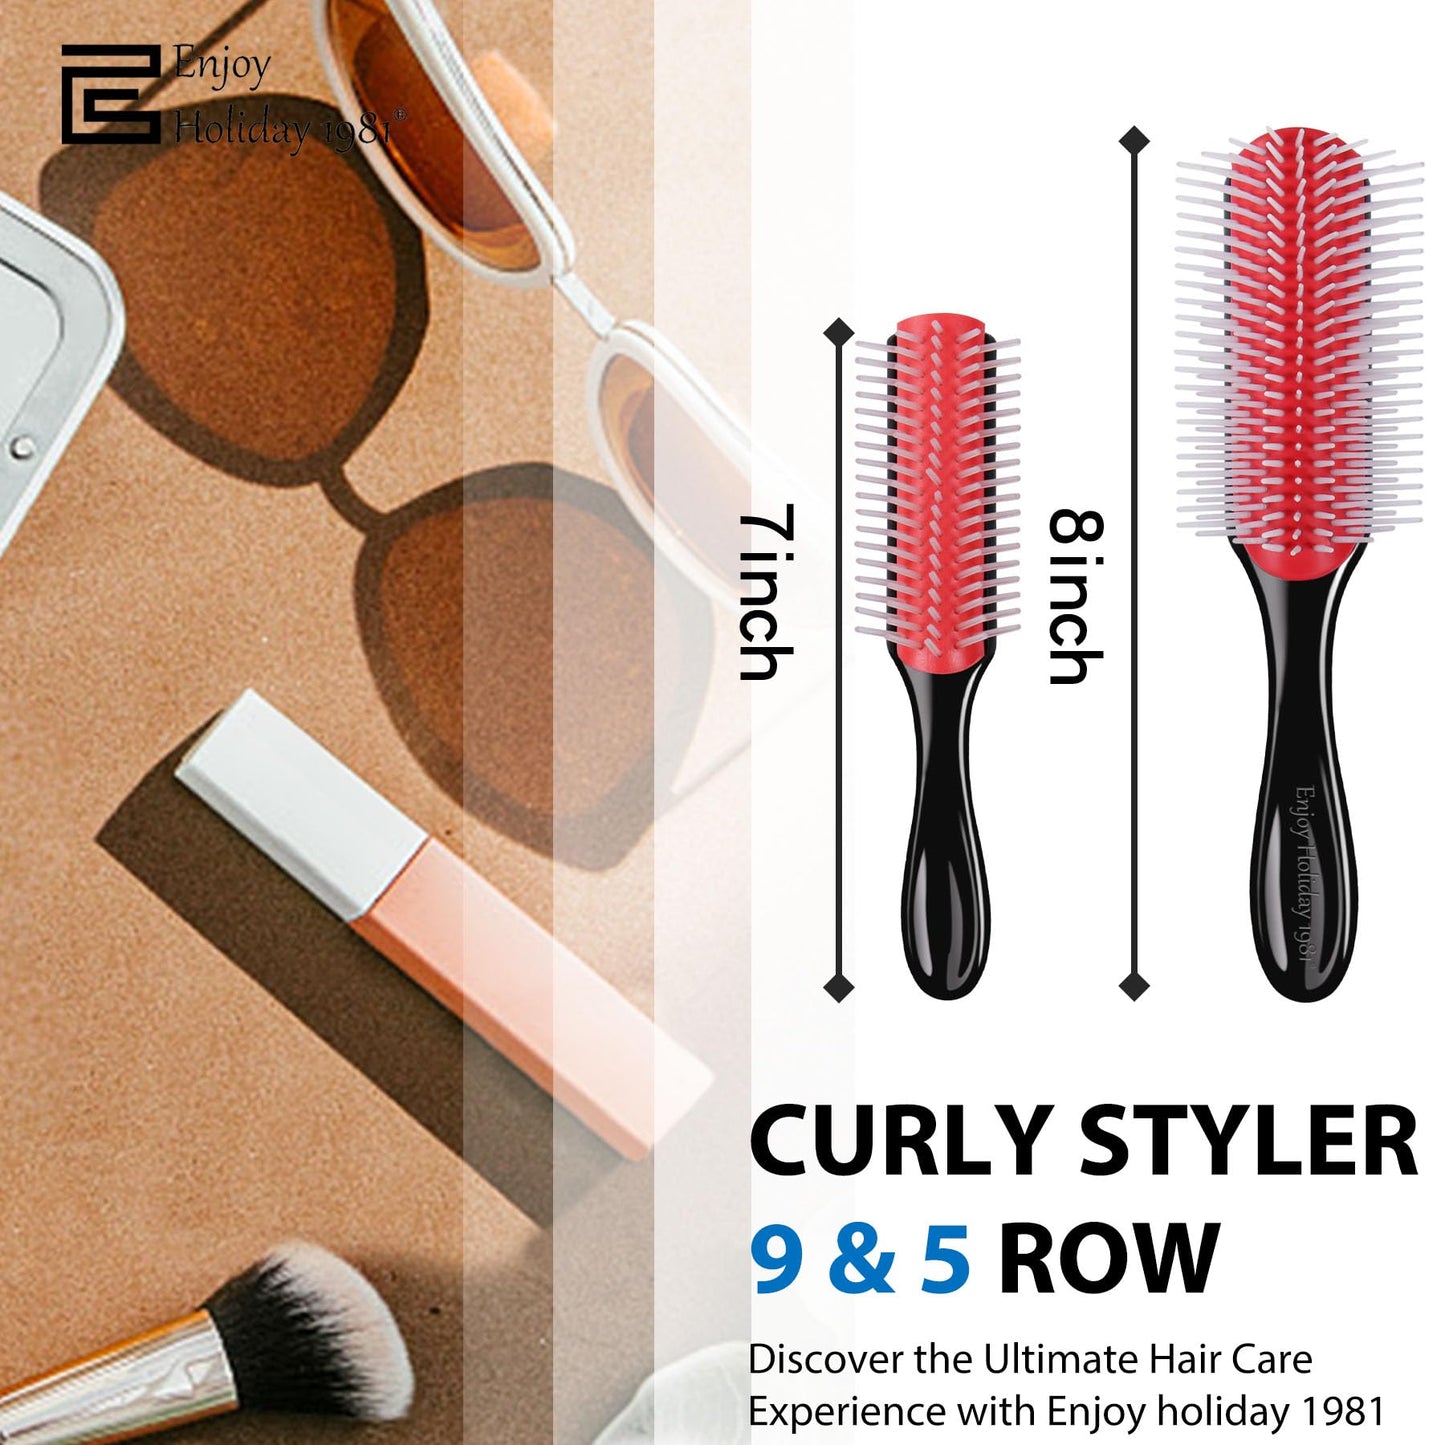 2 PCS Hair Brush for Women Men Curly Wet or Dry Hair 9 Row 5 Row Classic Styling Brushes for Natural Thick Hair, Blow Separating, Shaping Defining Detangling Curls Tools Travel Bristle Black Hairbrush